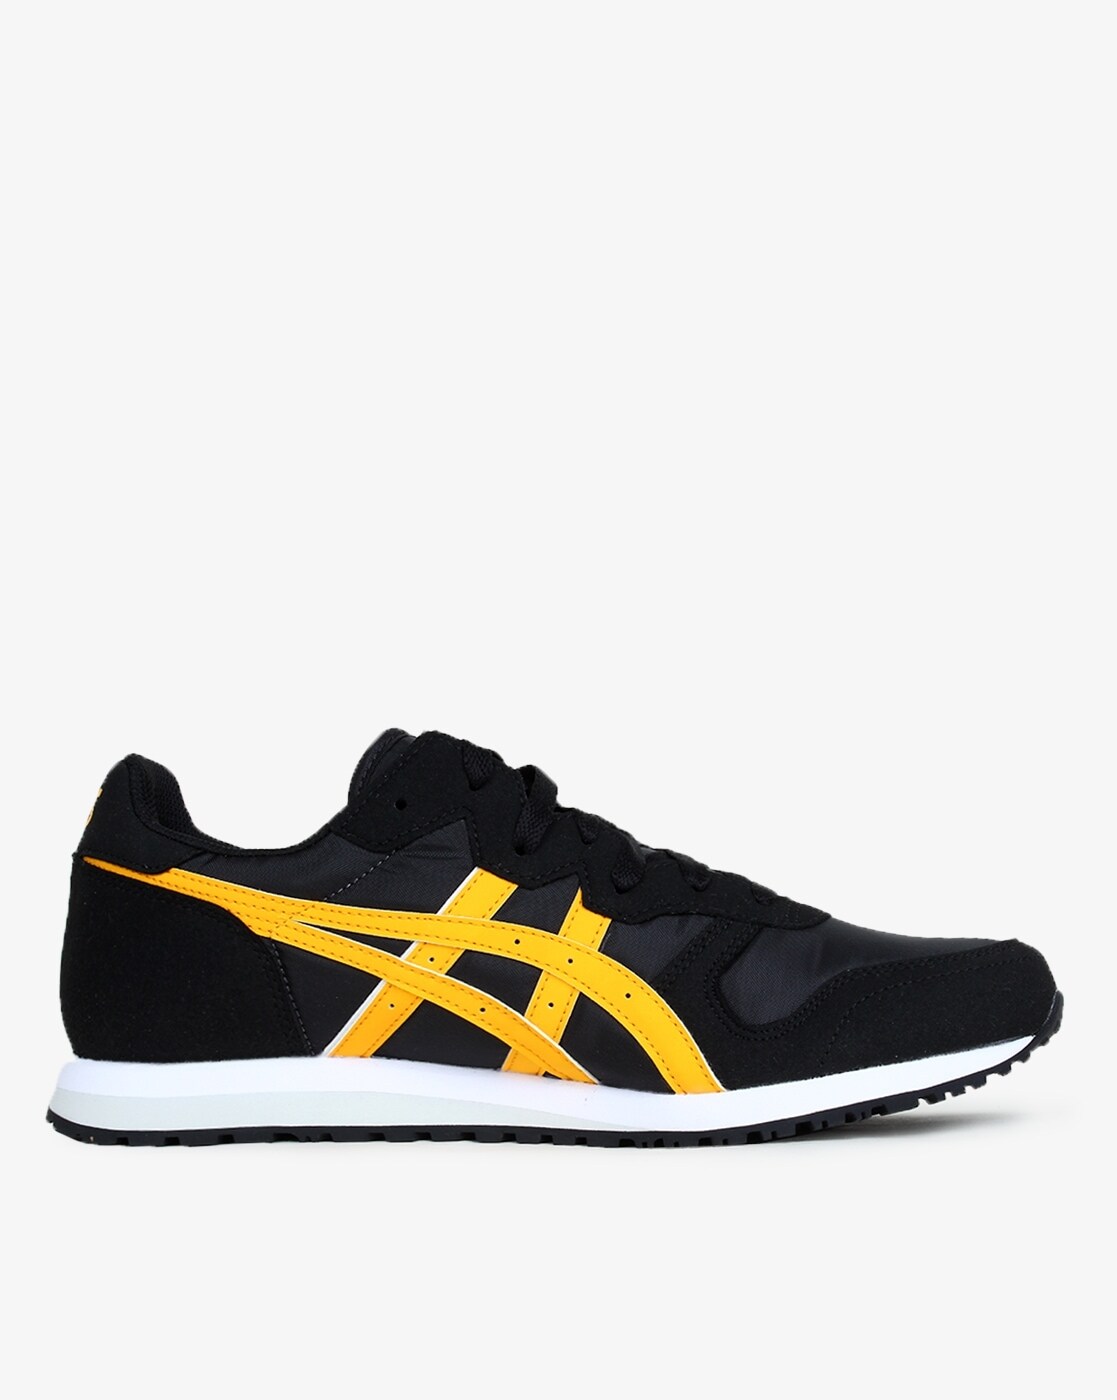 asics casual shoes black